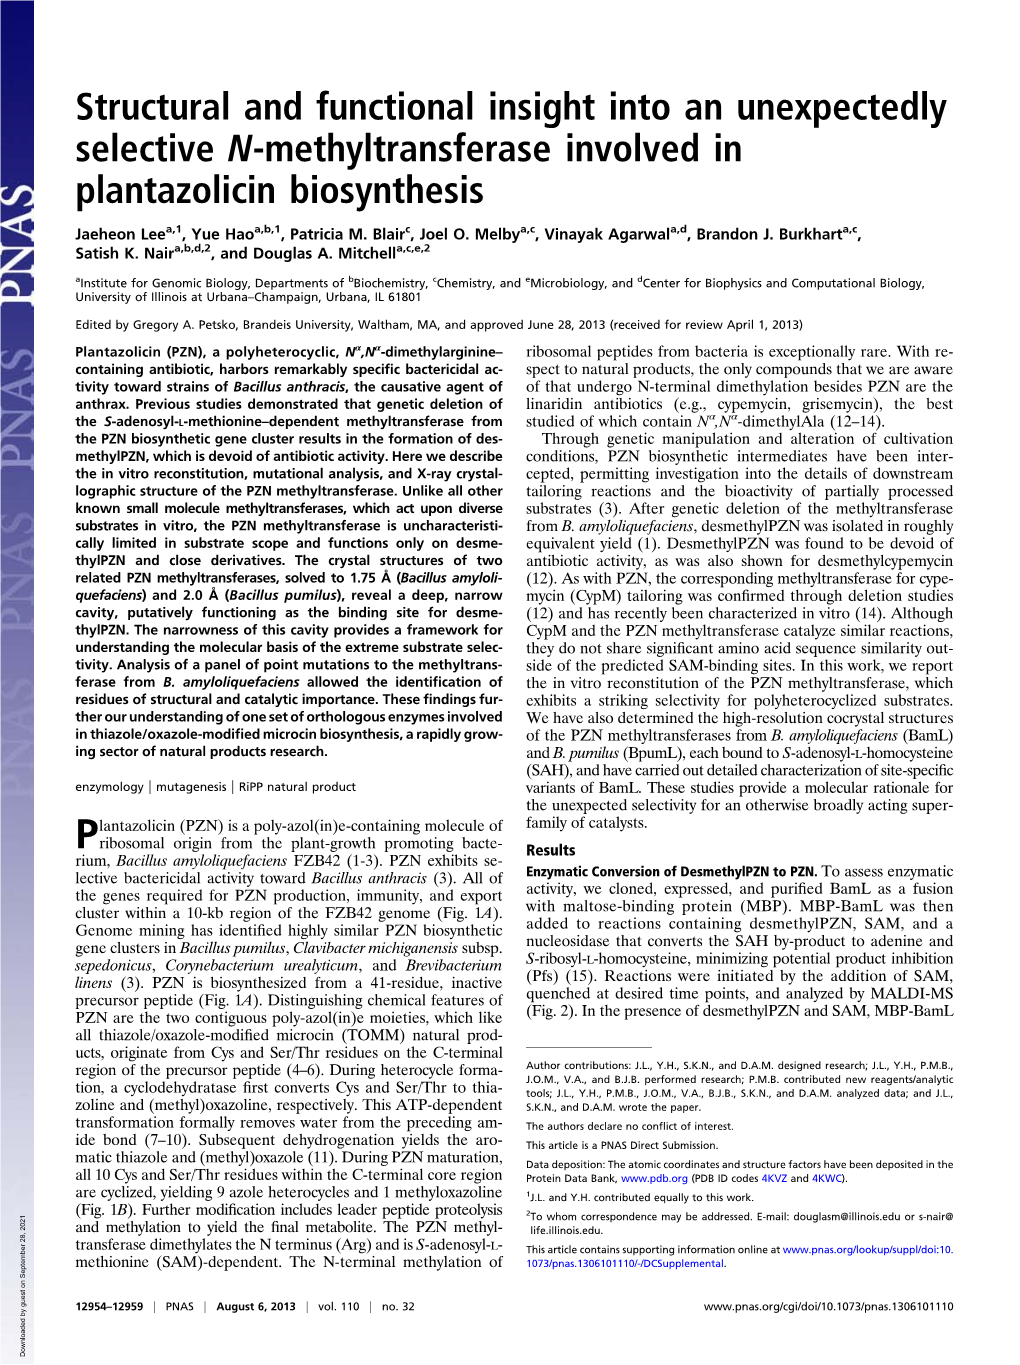 Structural and Functional Insight Into an Unexpectedly Selective N-Methyltransferase Involved in Plantazolicin Biosynthesis